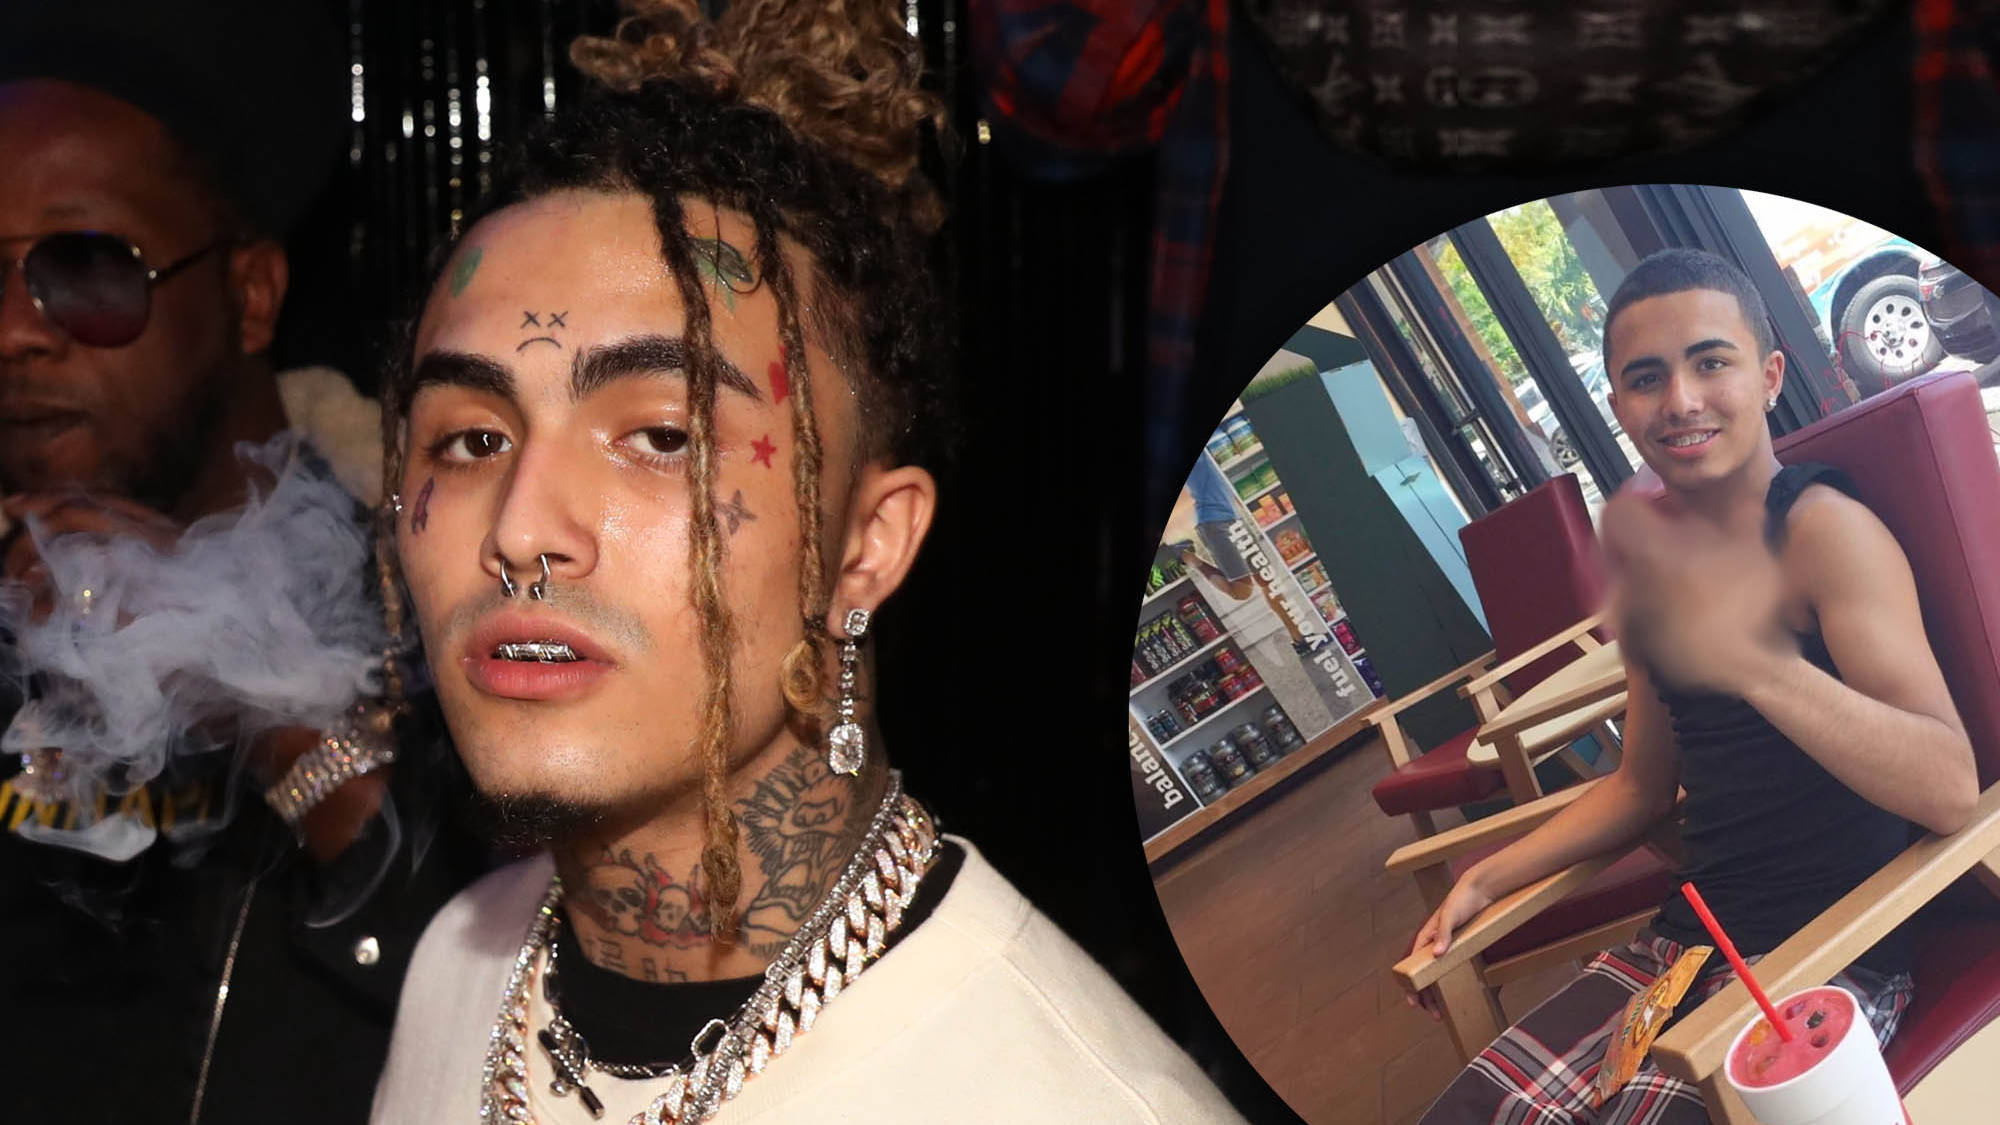 Lil Pump S Face Without Tattoos Revealed In New Instagram Post.